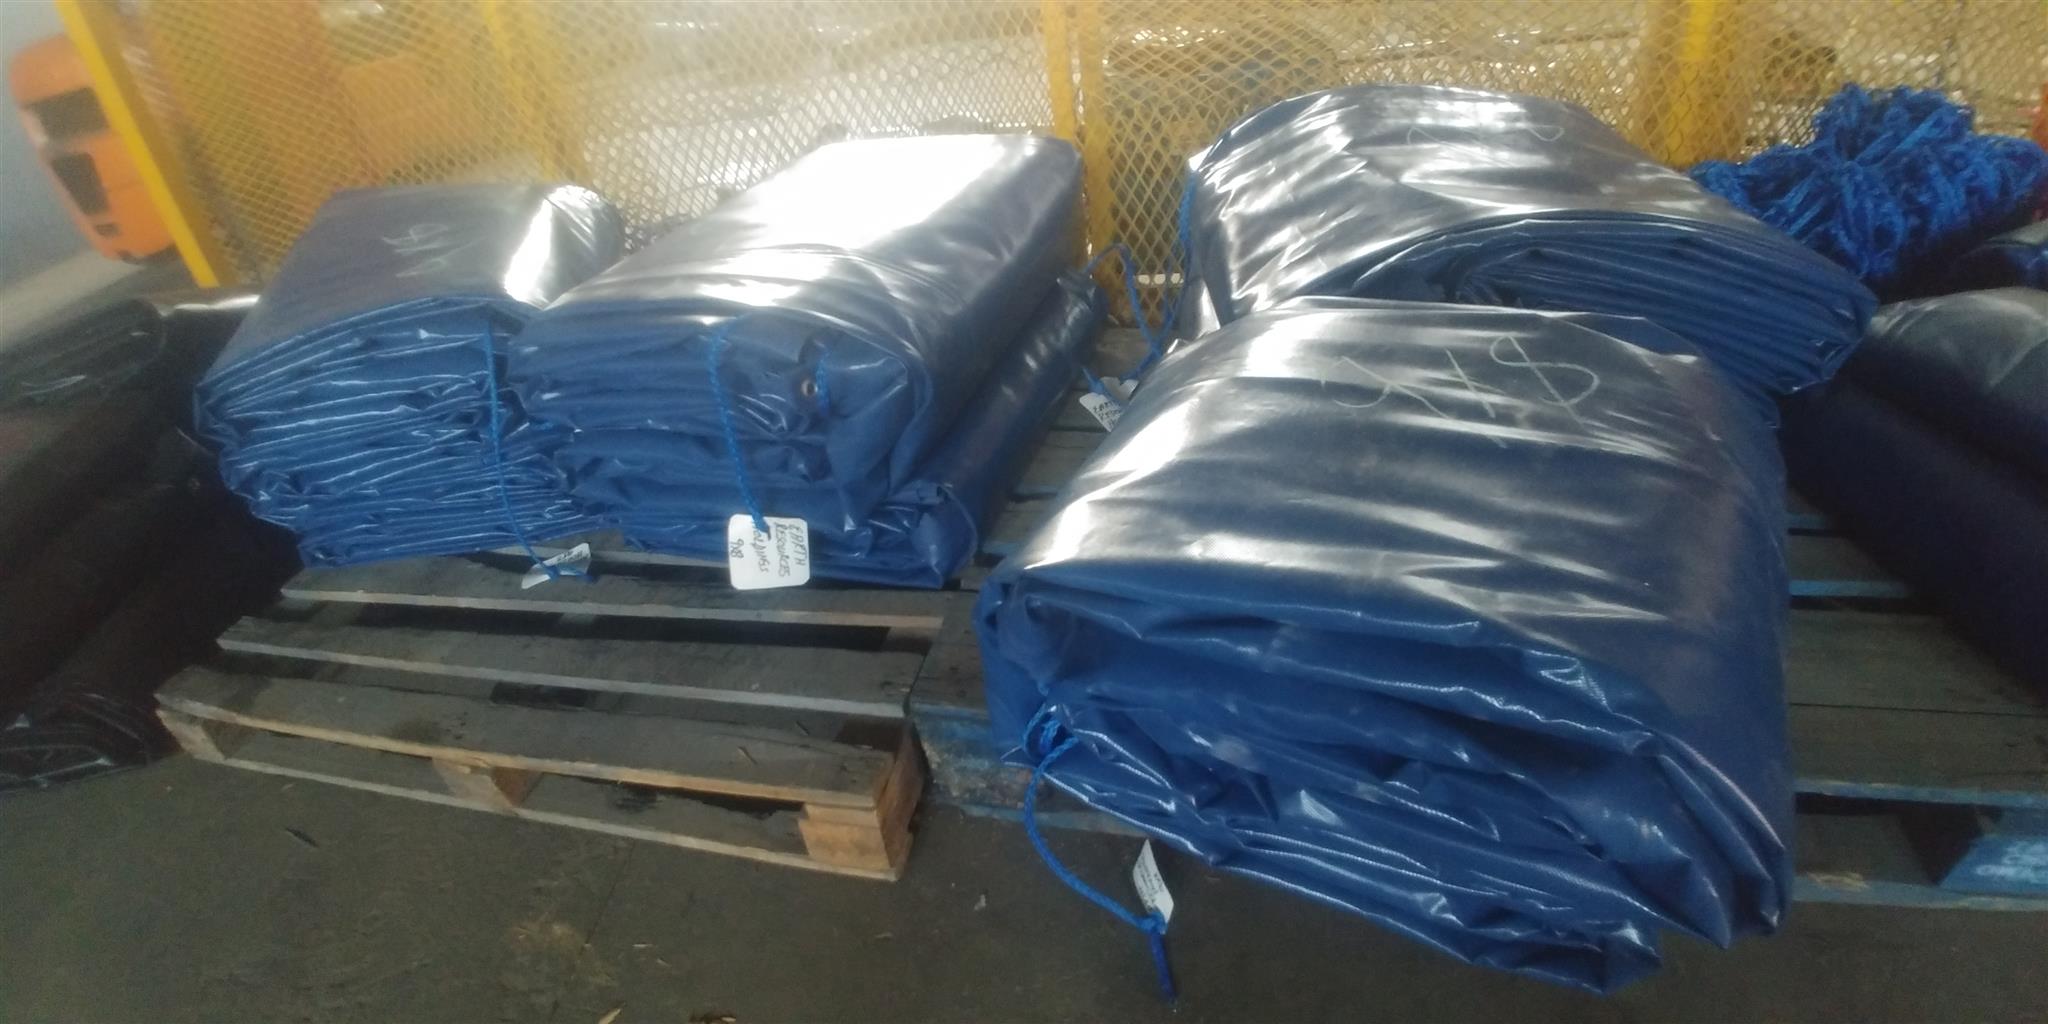 9m x 9m heavy duty truck covers/tarpaulins and cargo nets for super-link and tri_axle